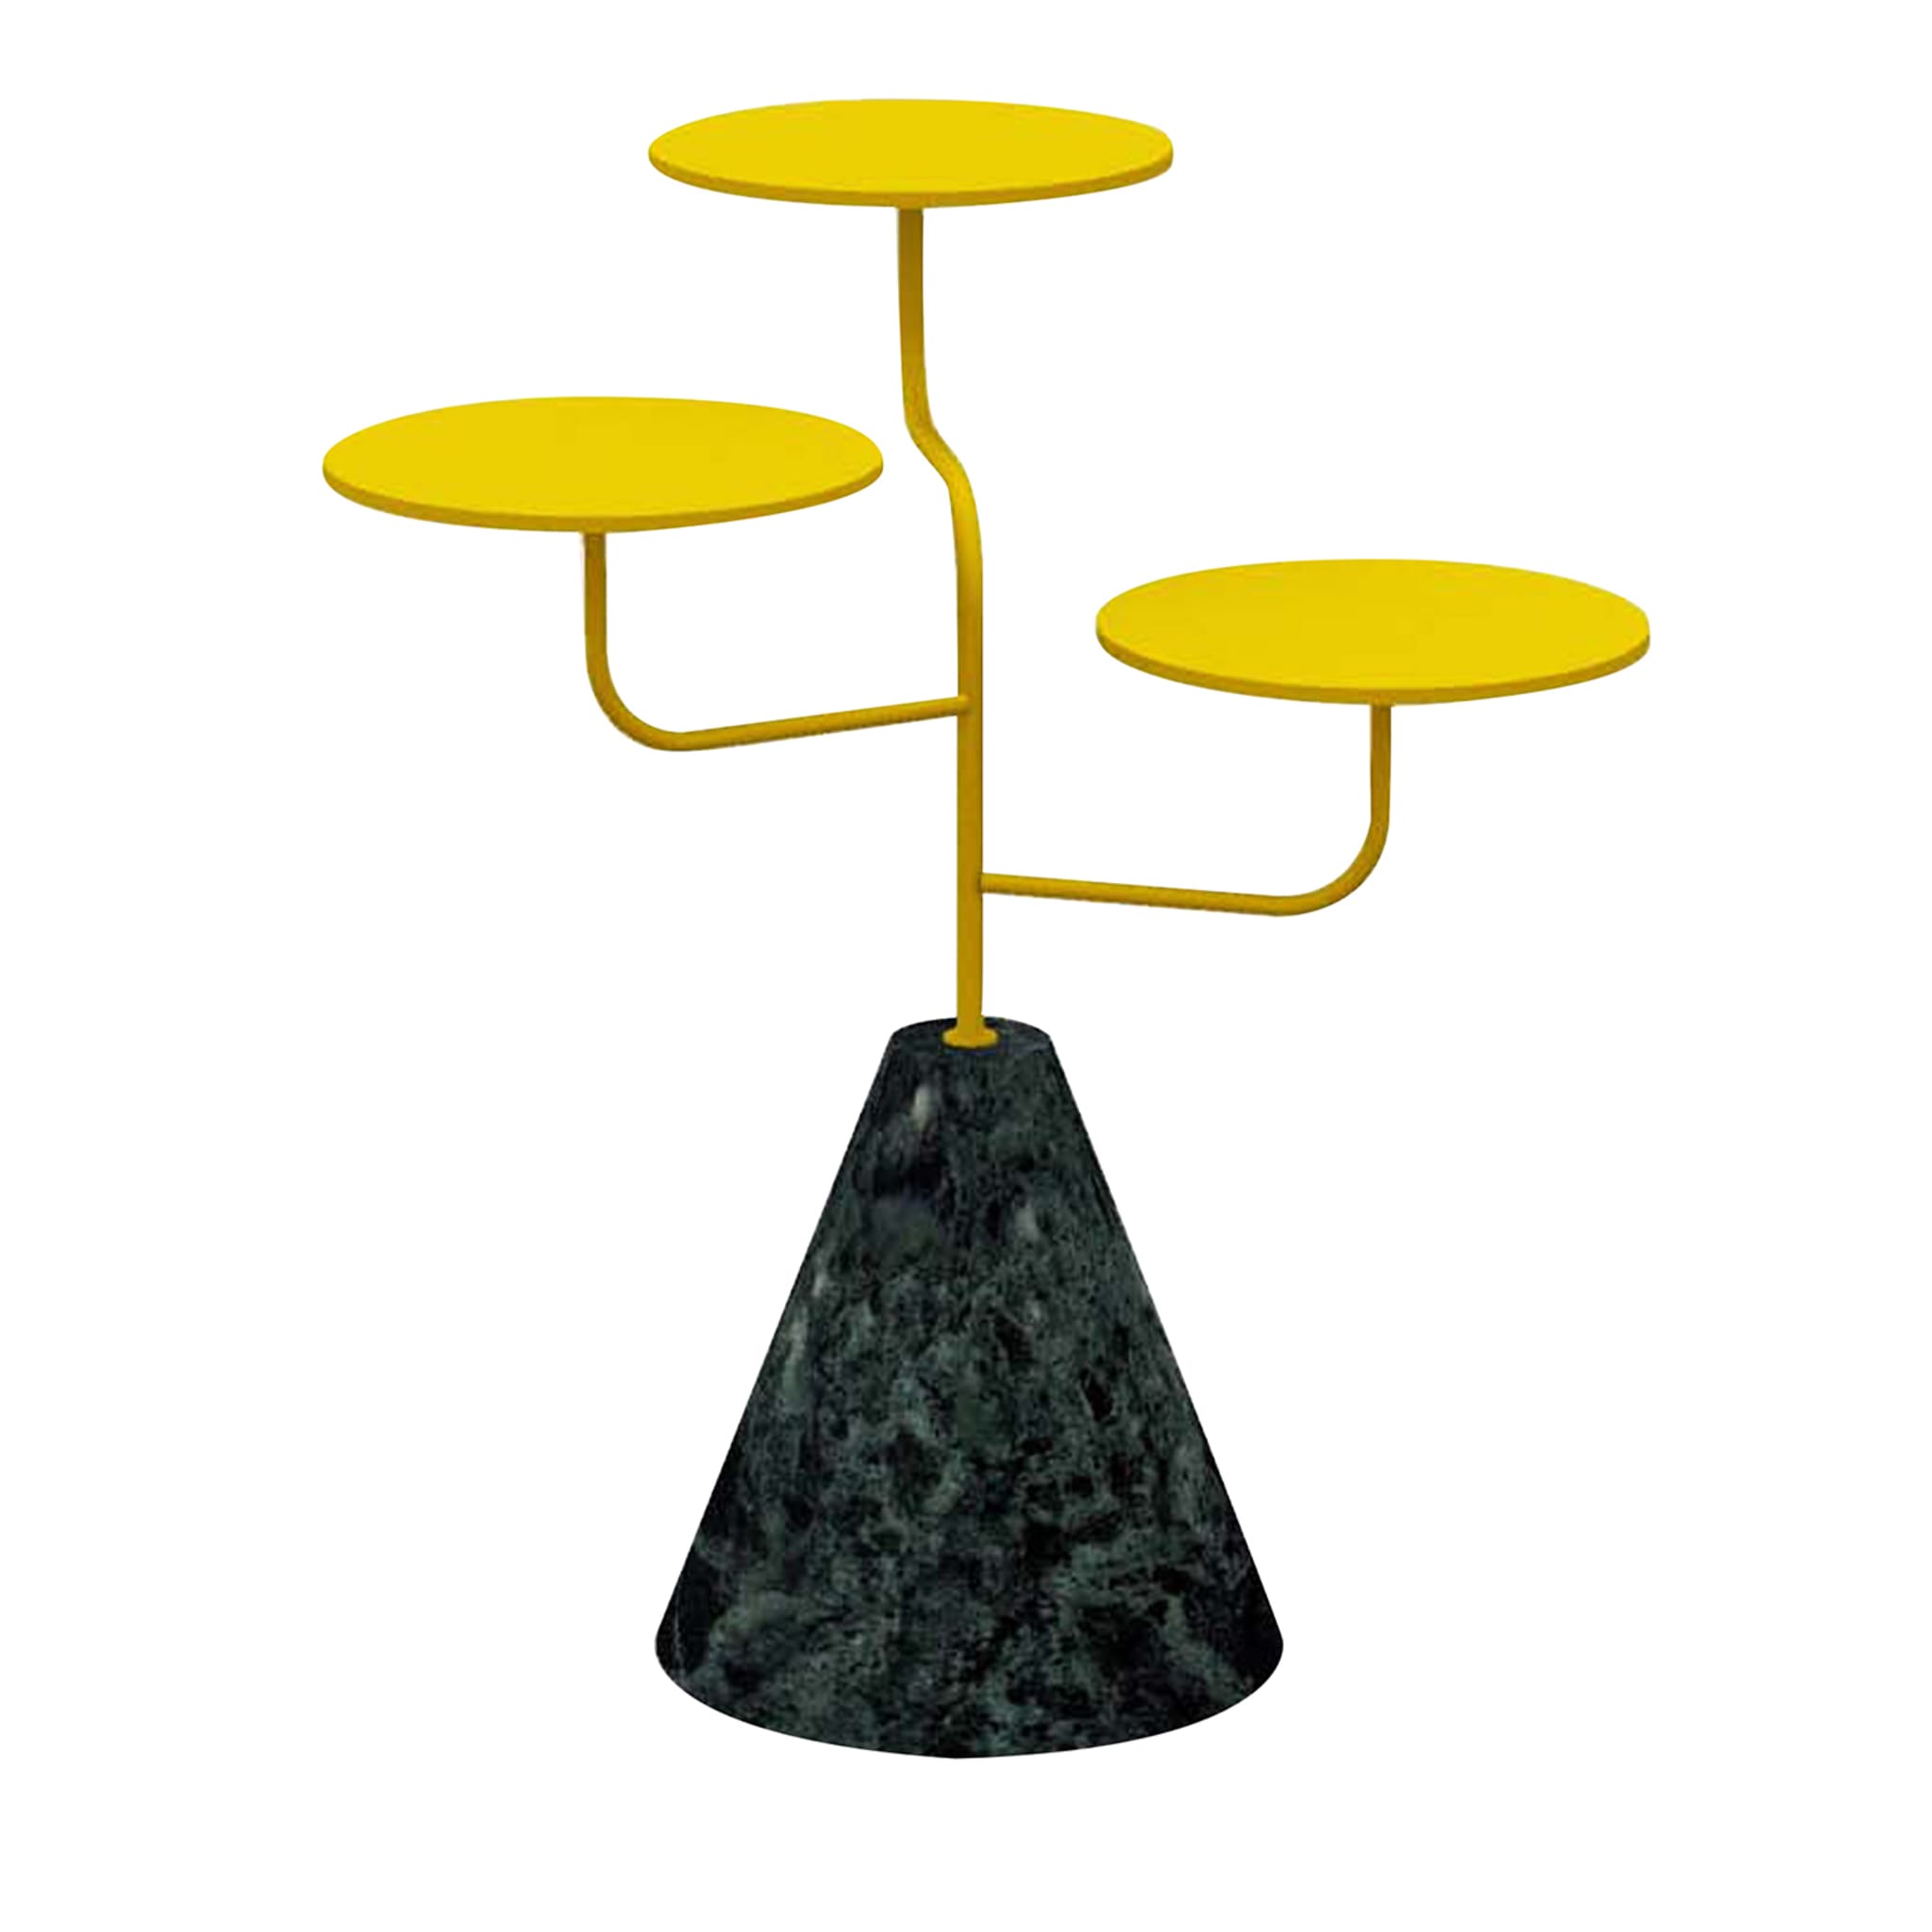 Condiviso 3-Tier Yellow/Green Guatemala Serving Stand - Main view